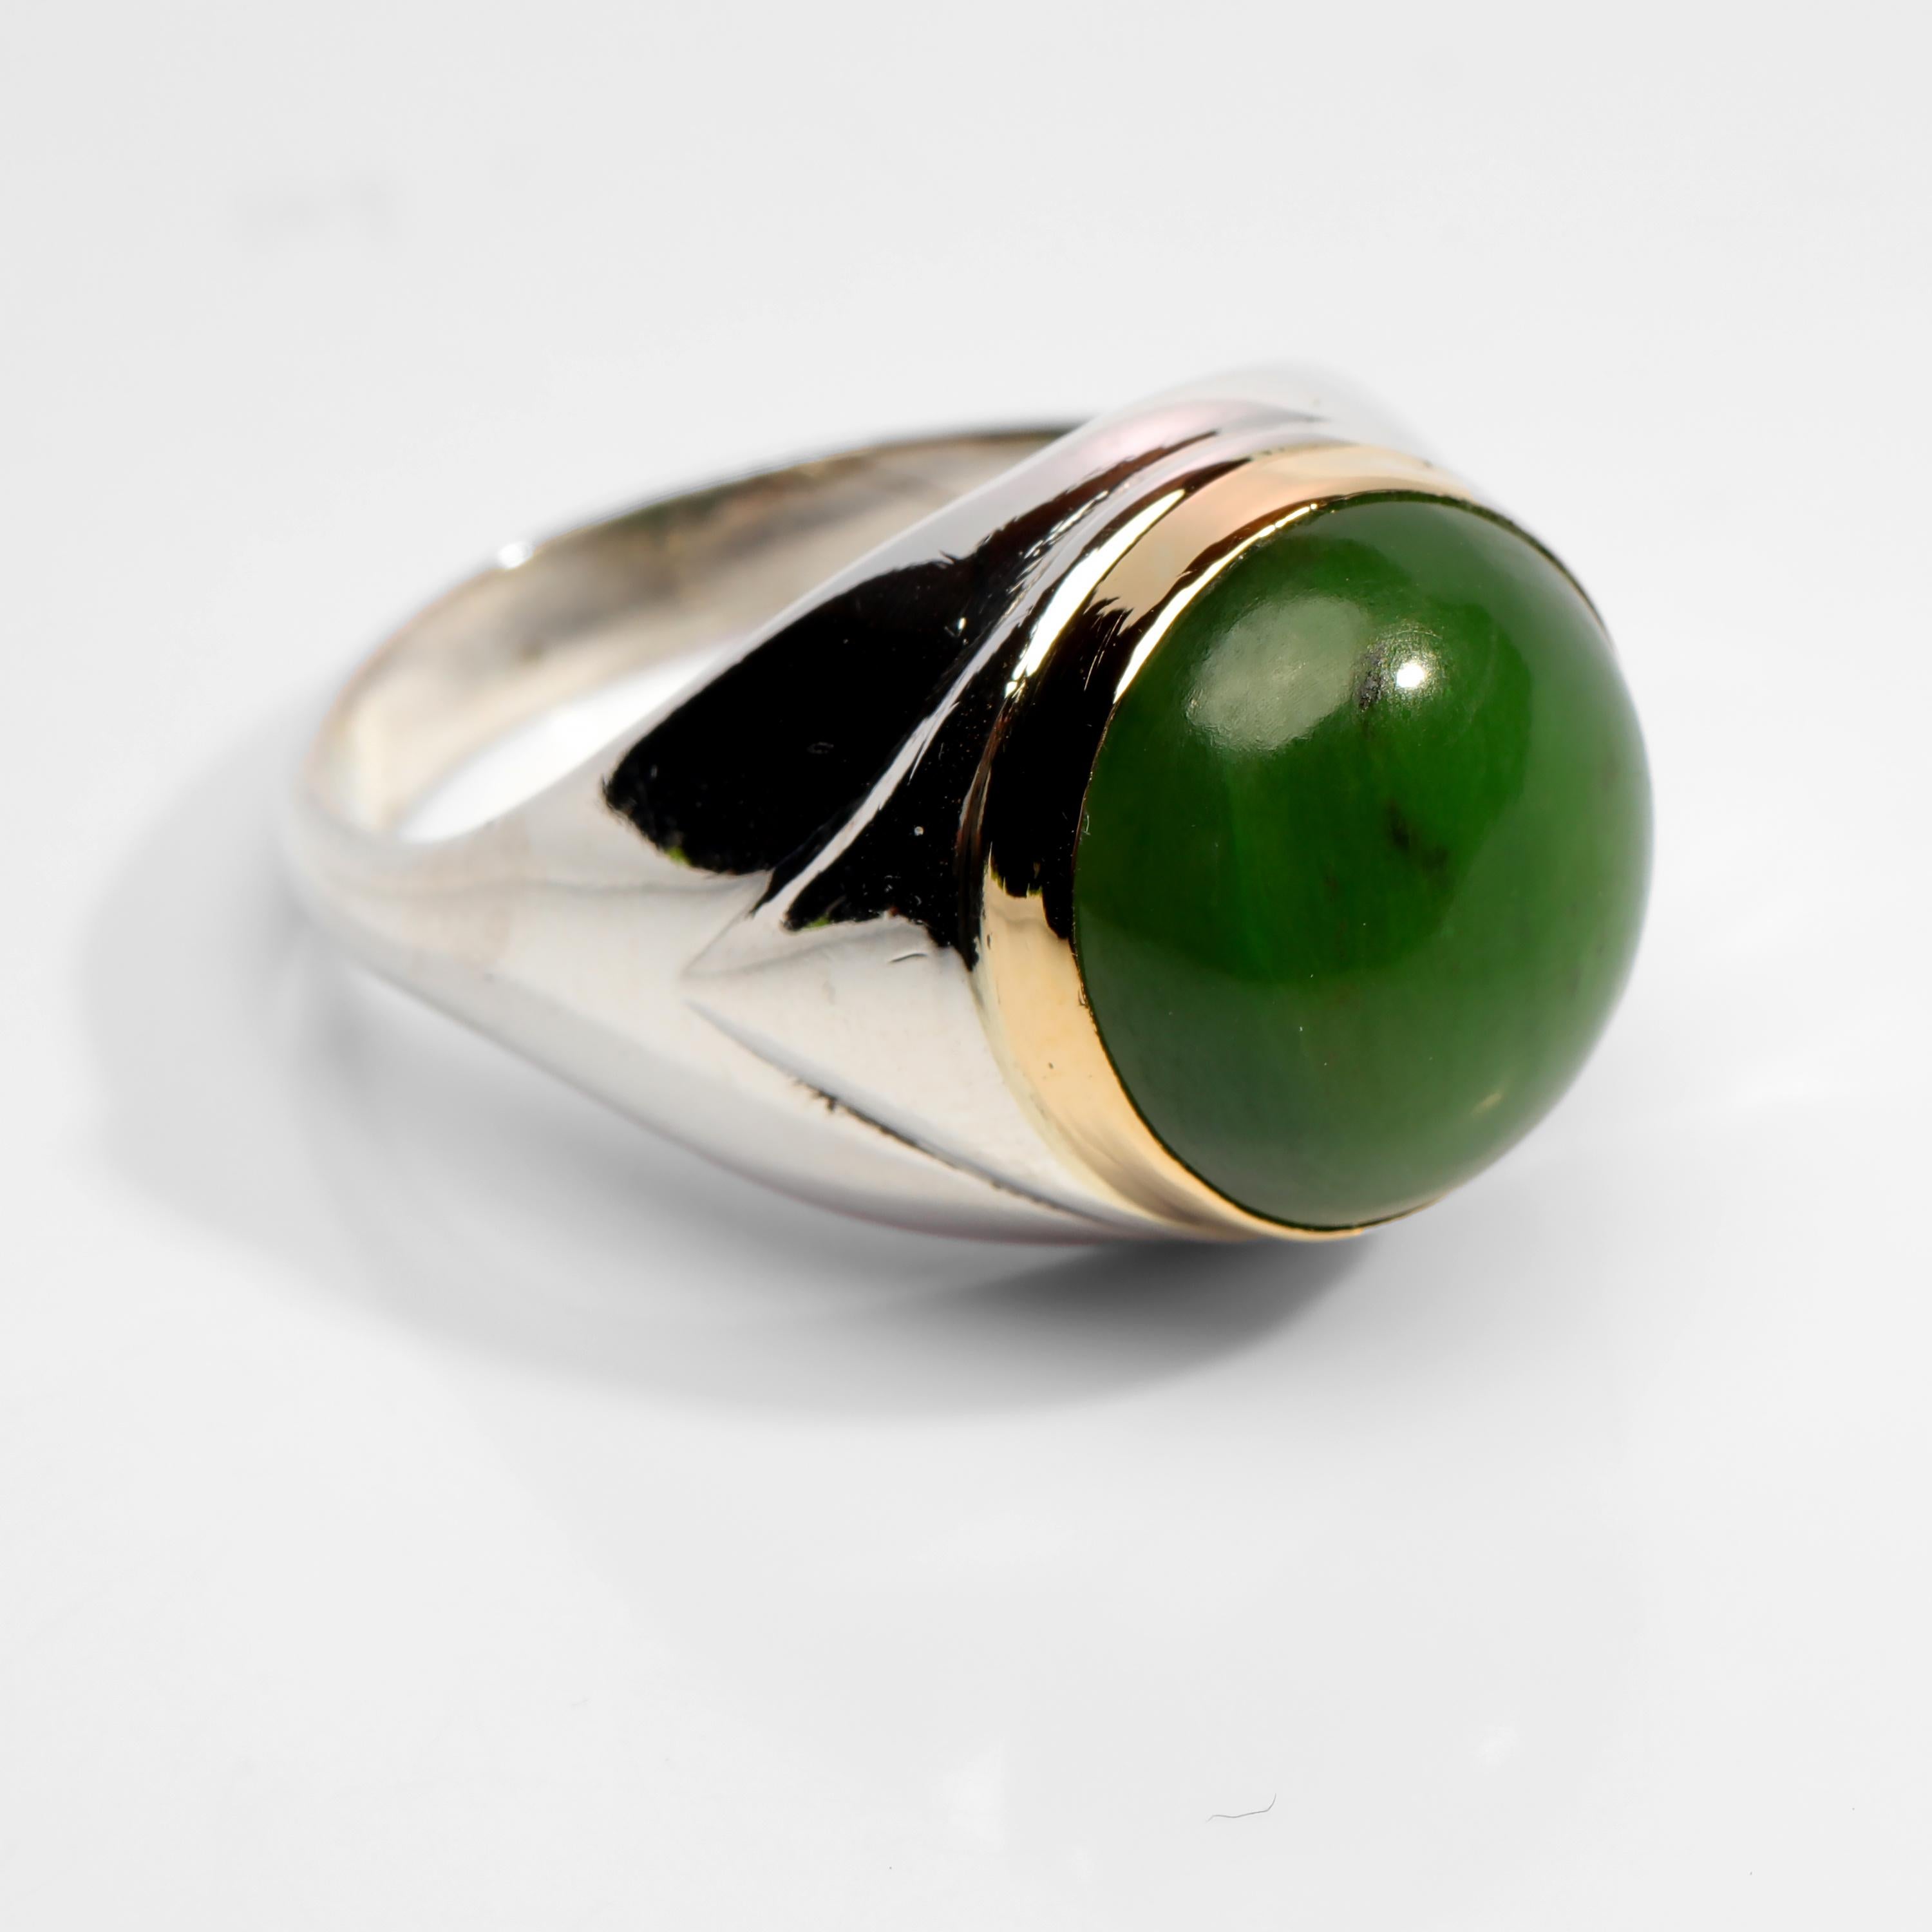 Cabochon British Columbian Jade Ring in Silver and Gold